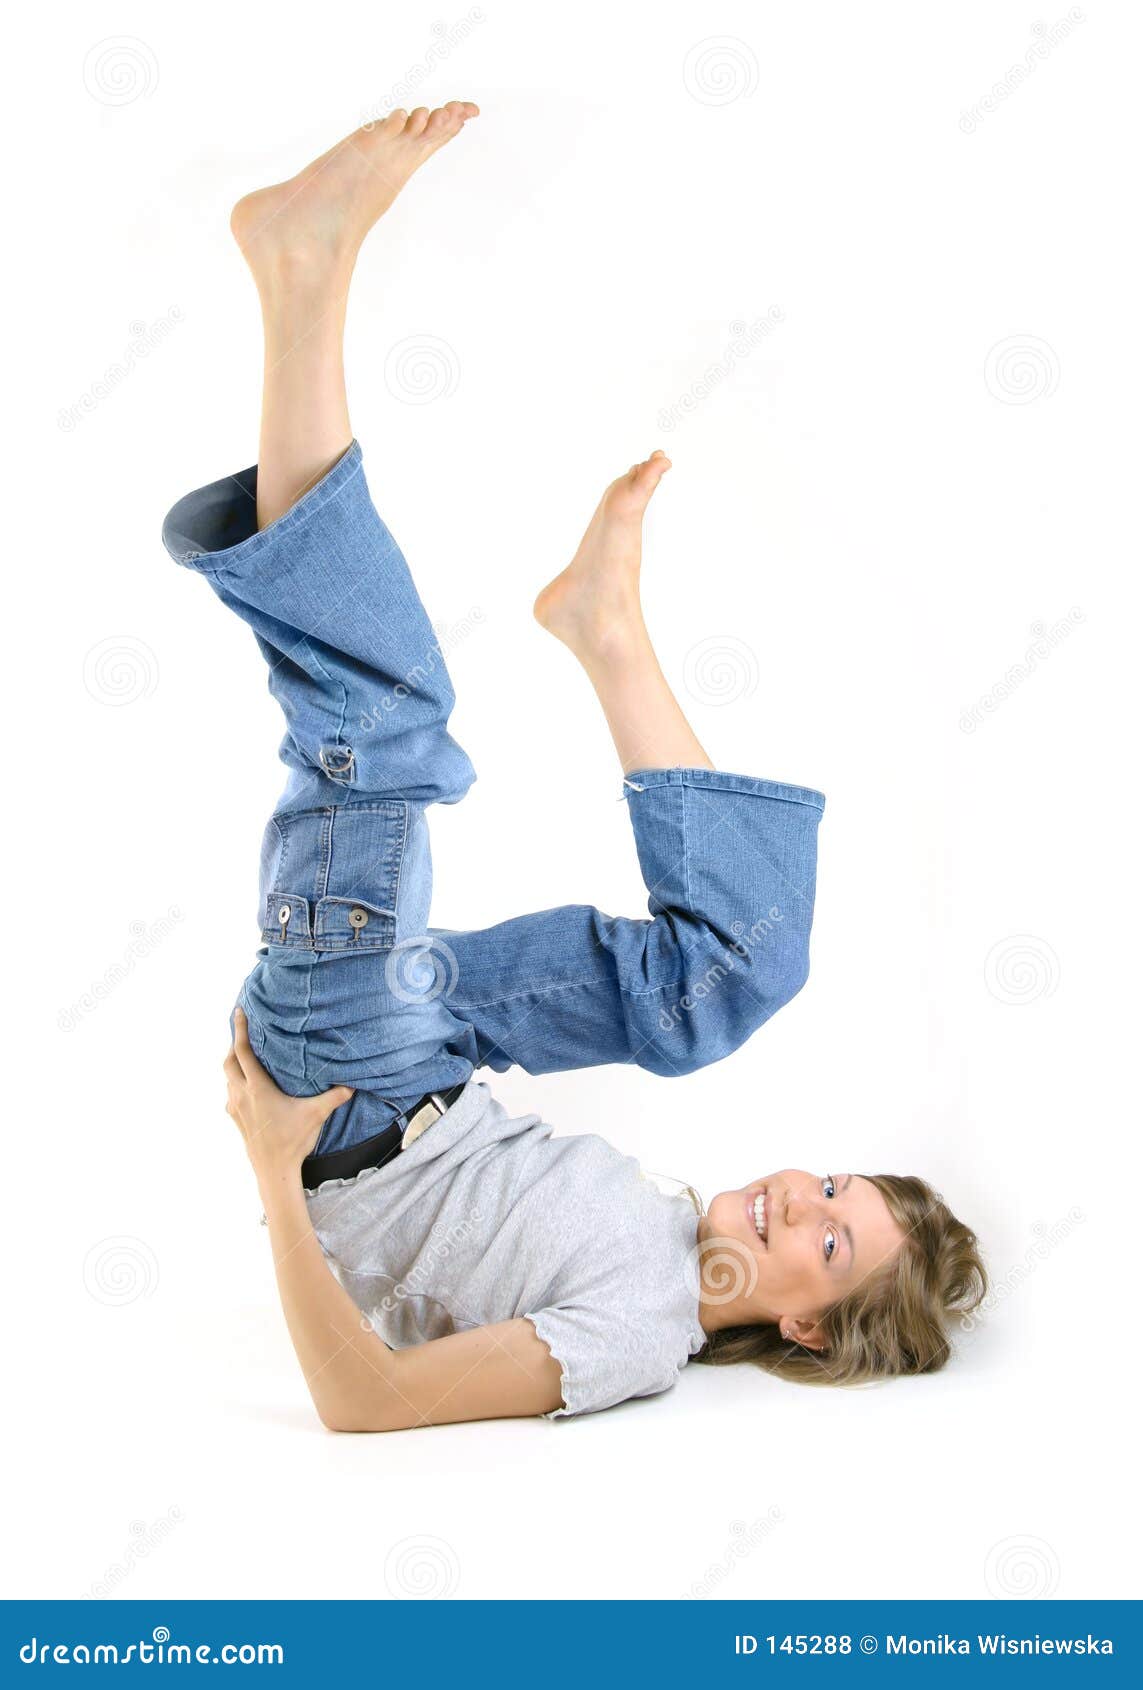 Young Woman Doing The Splits At Home With Her Leg Up On 